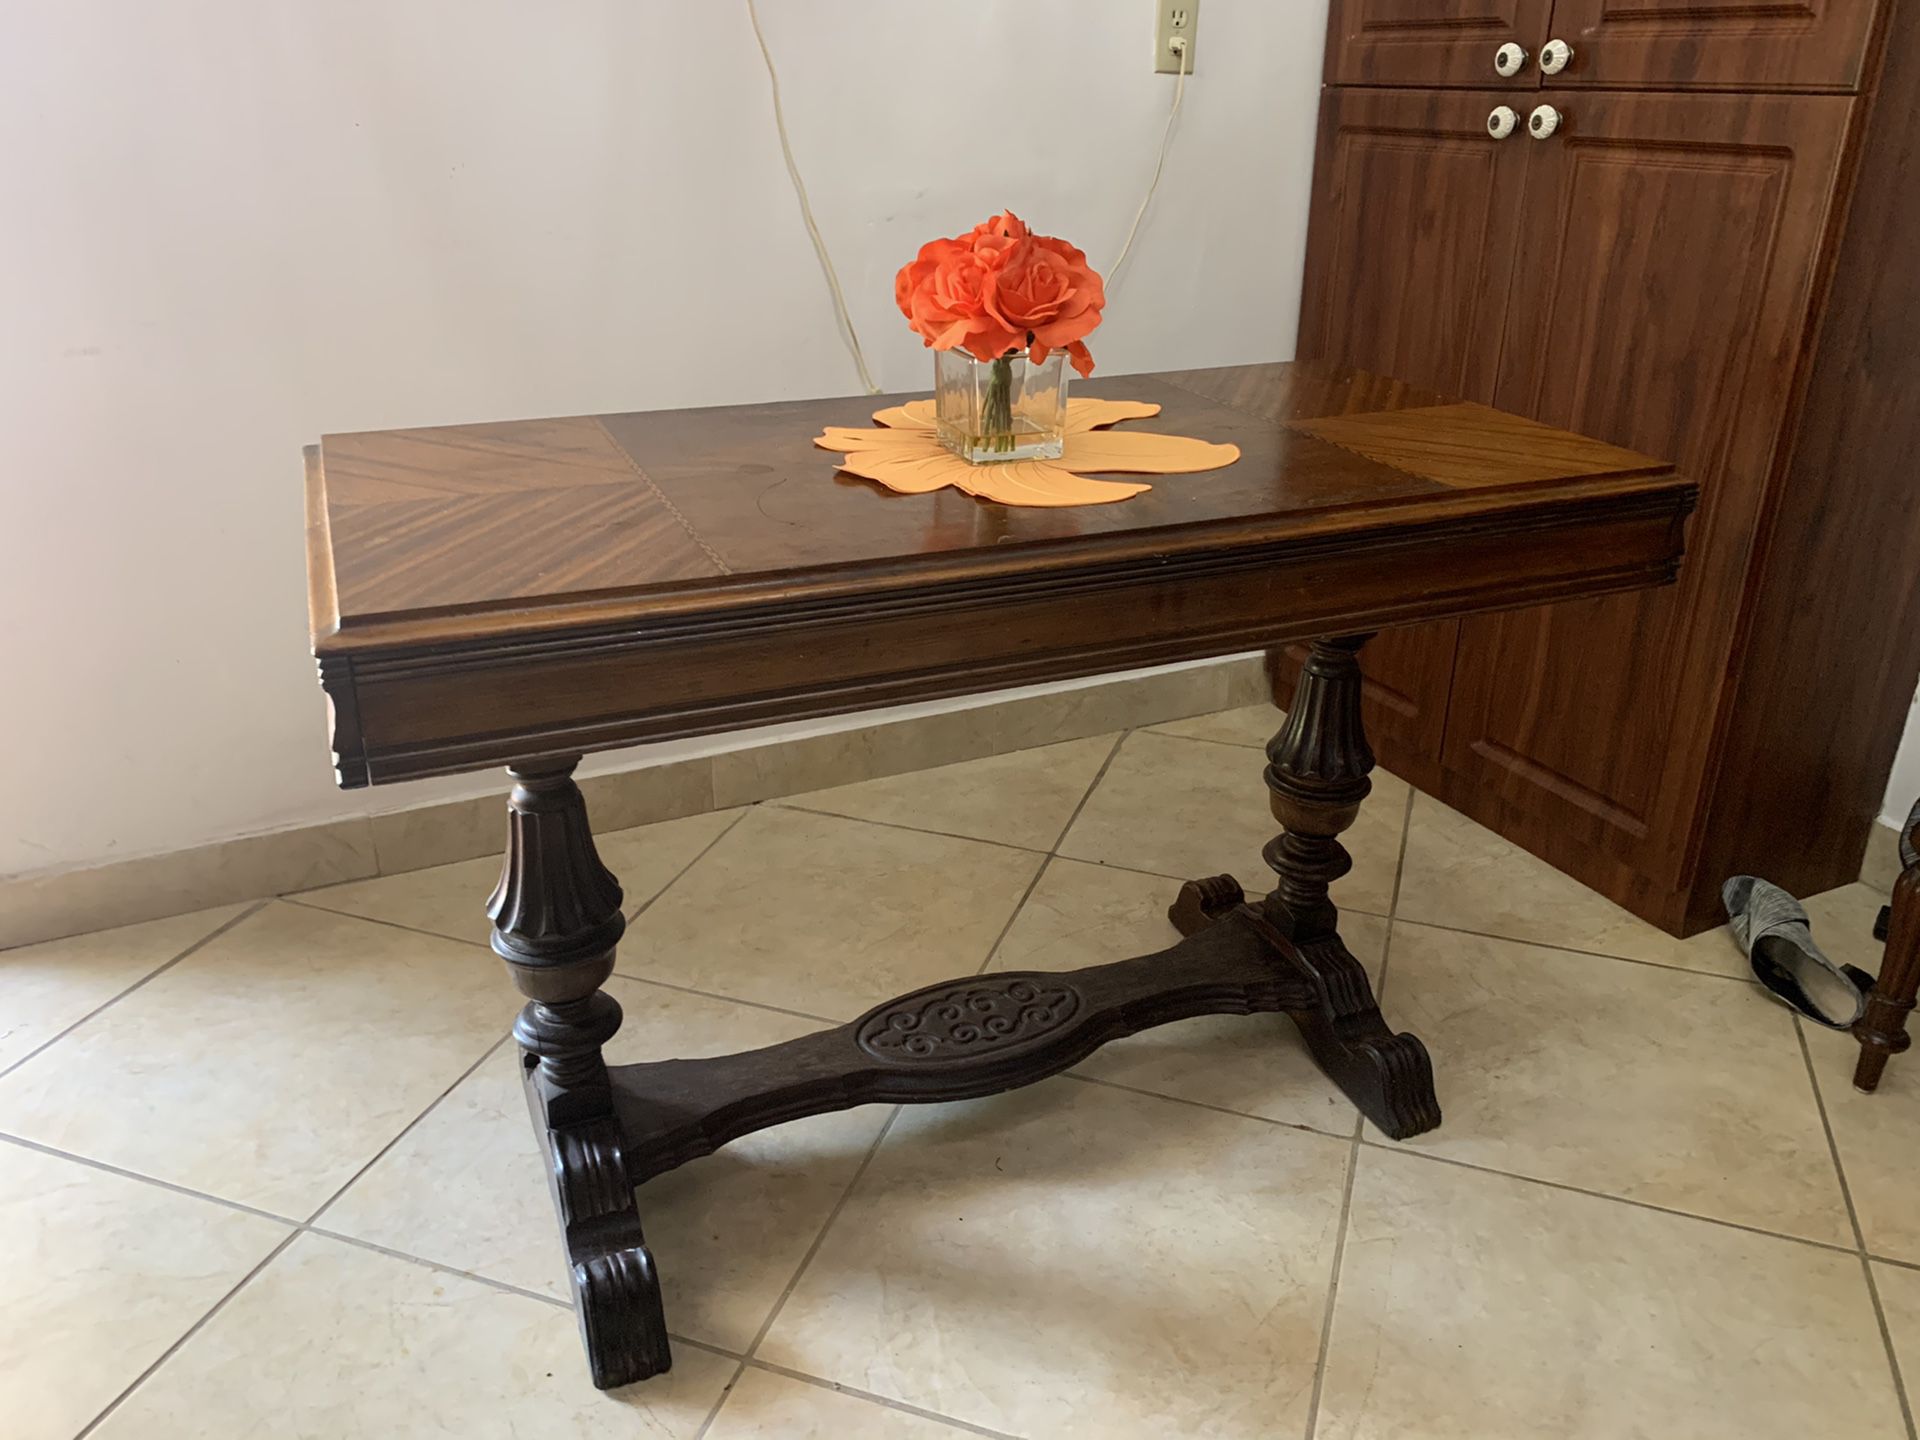 Antique console or small dining table